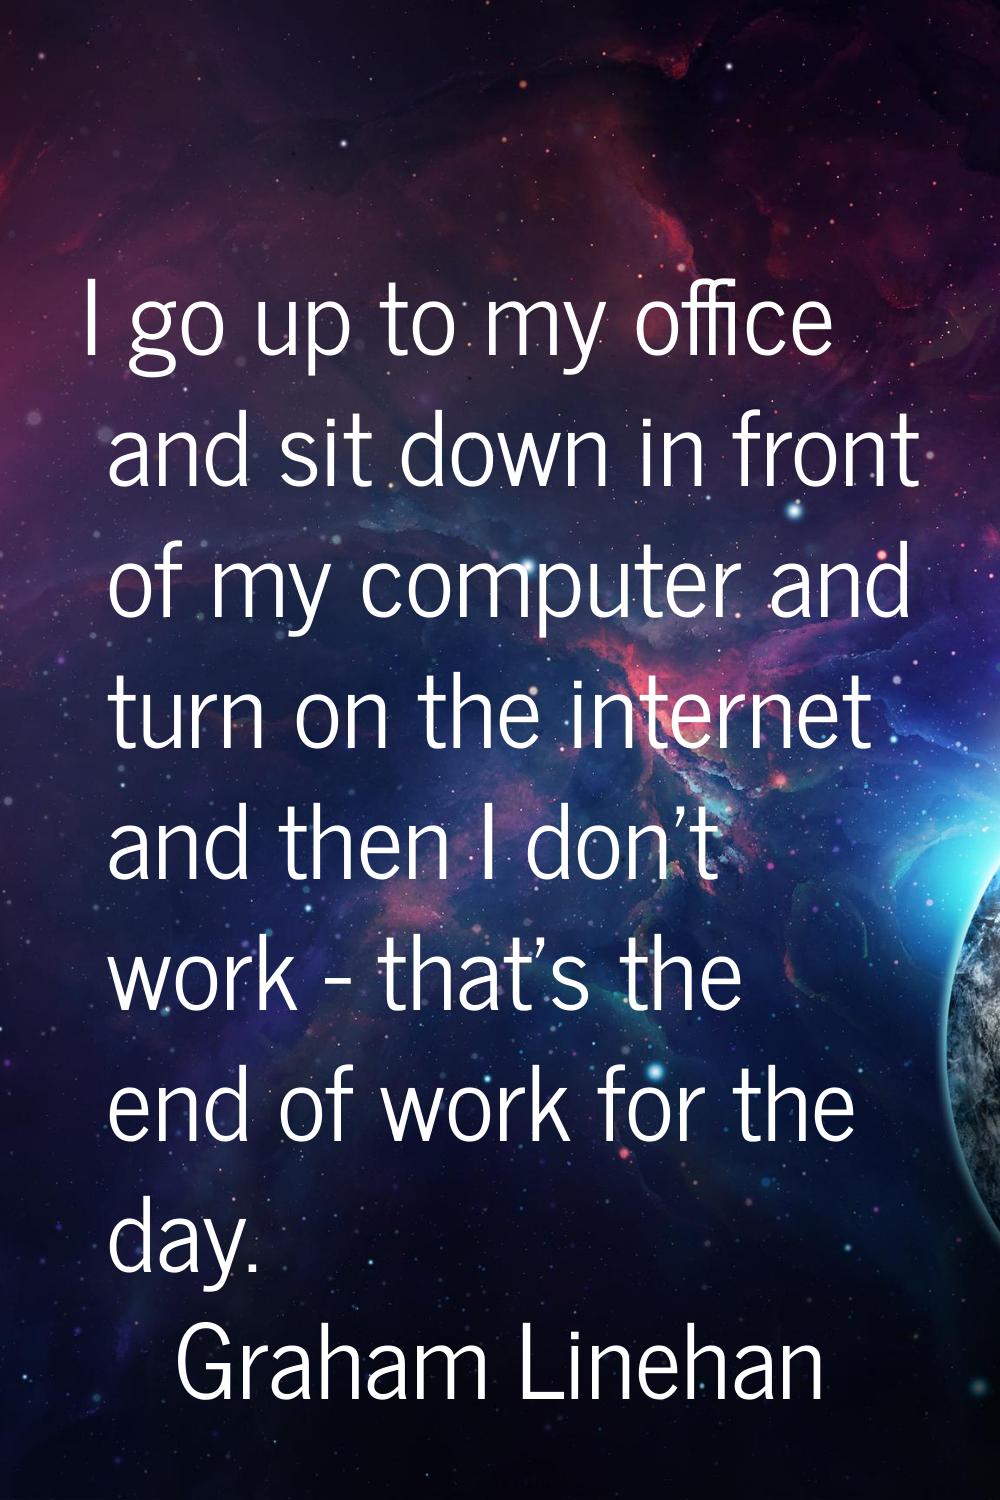 I go up to my office and sit down in front of my computer and turn on the internet and then I don't